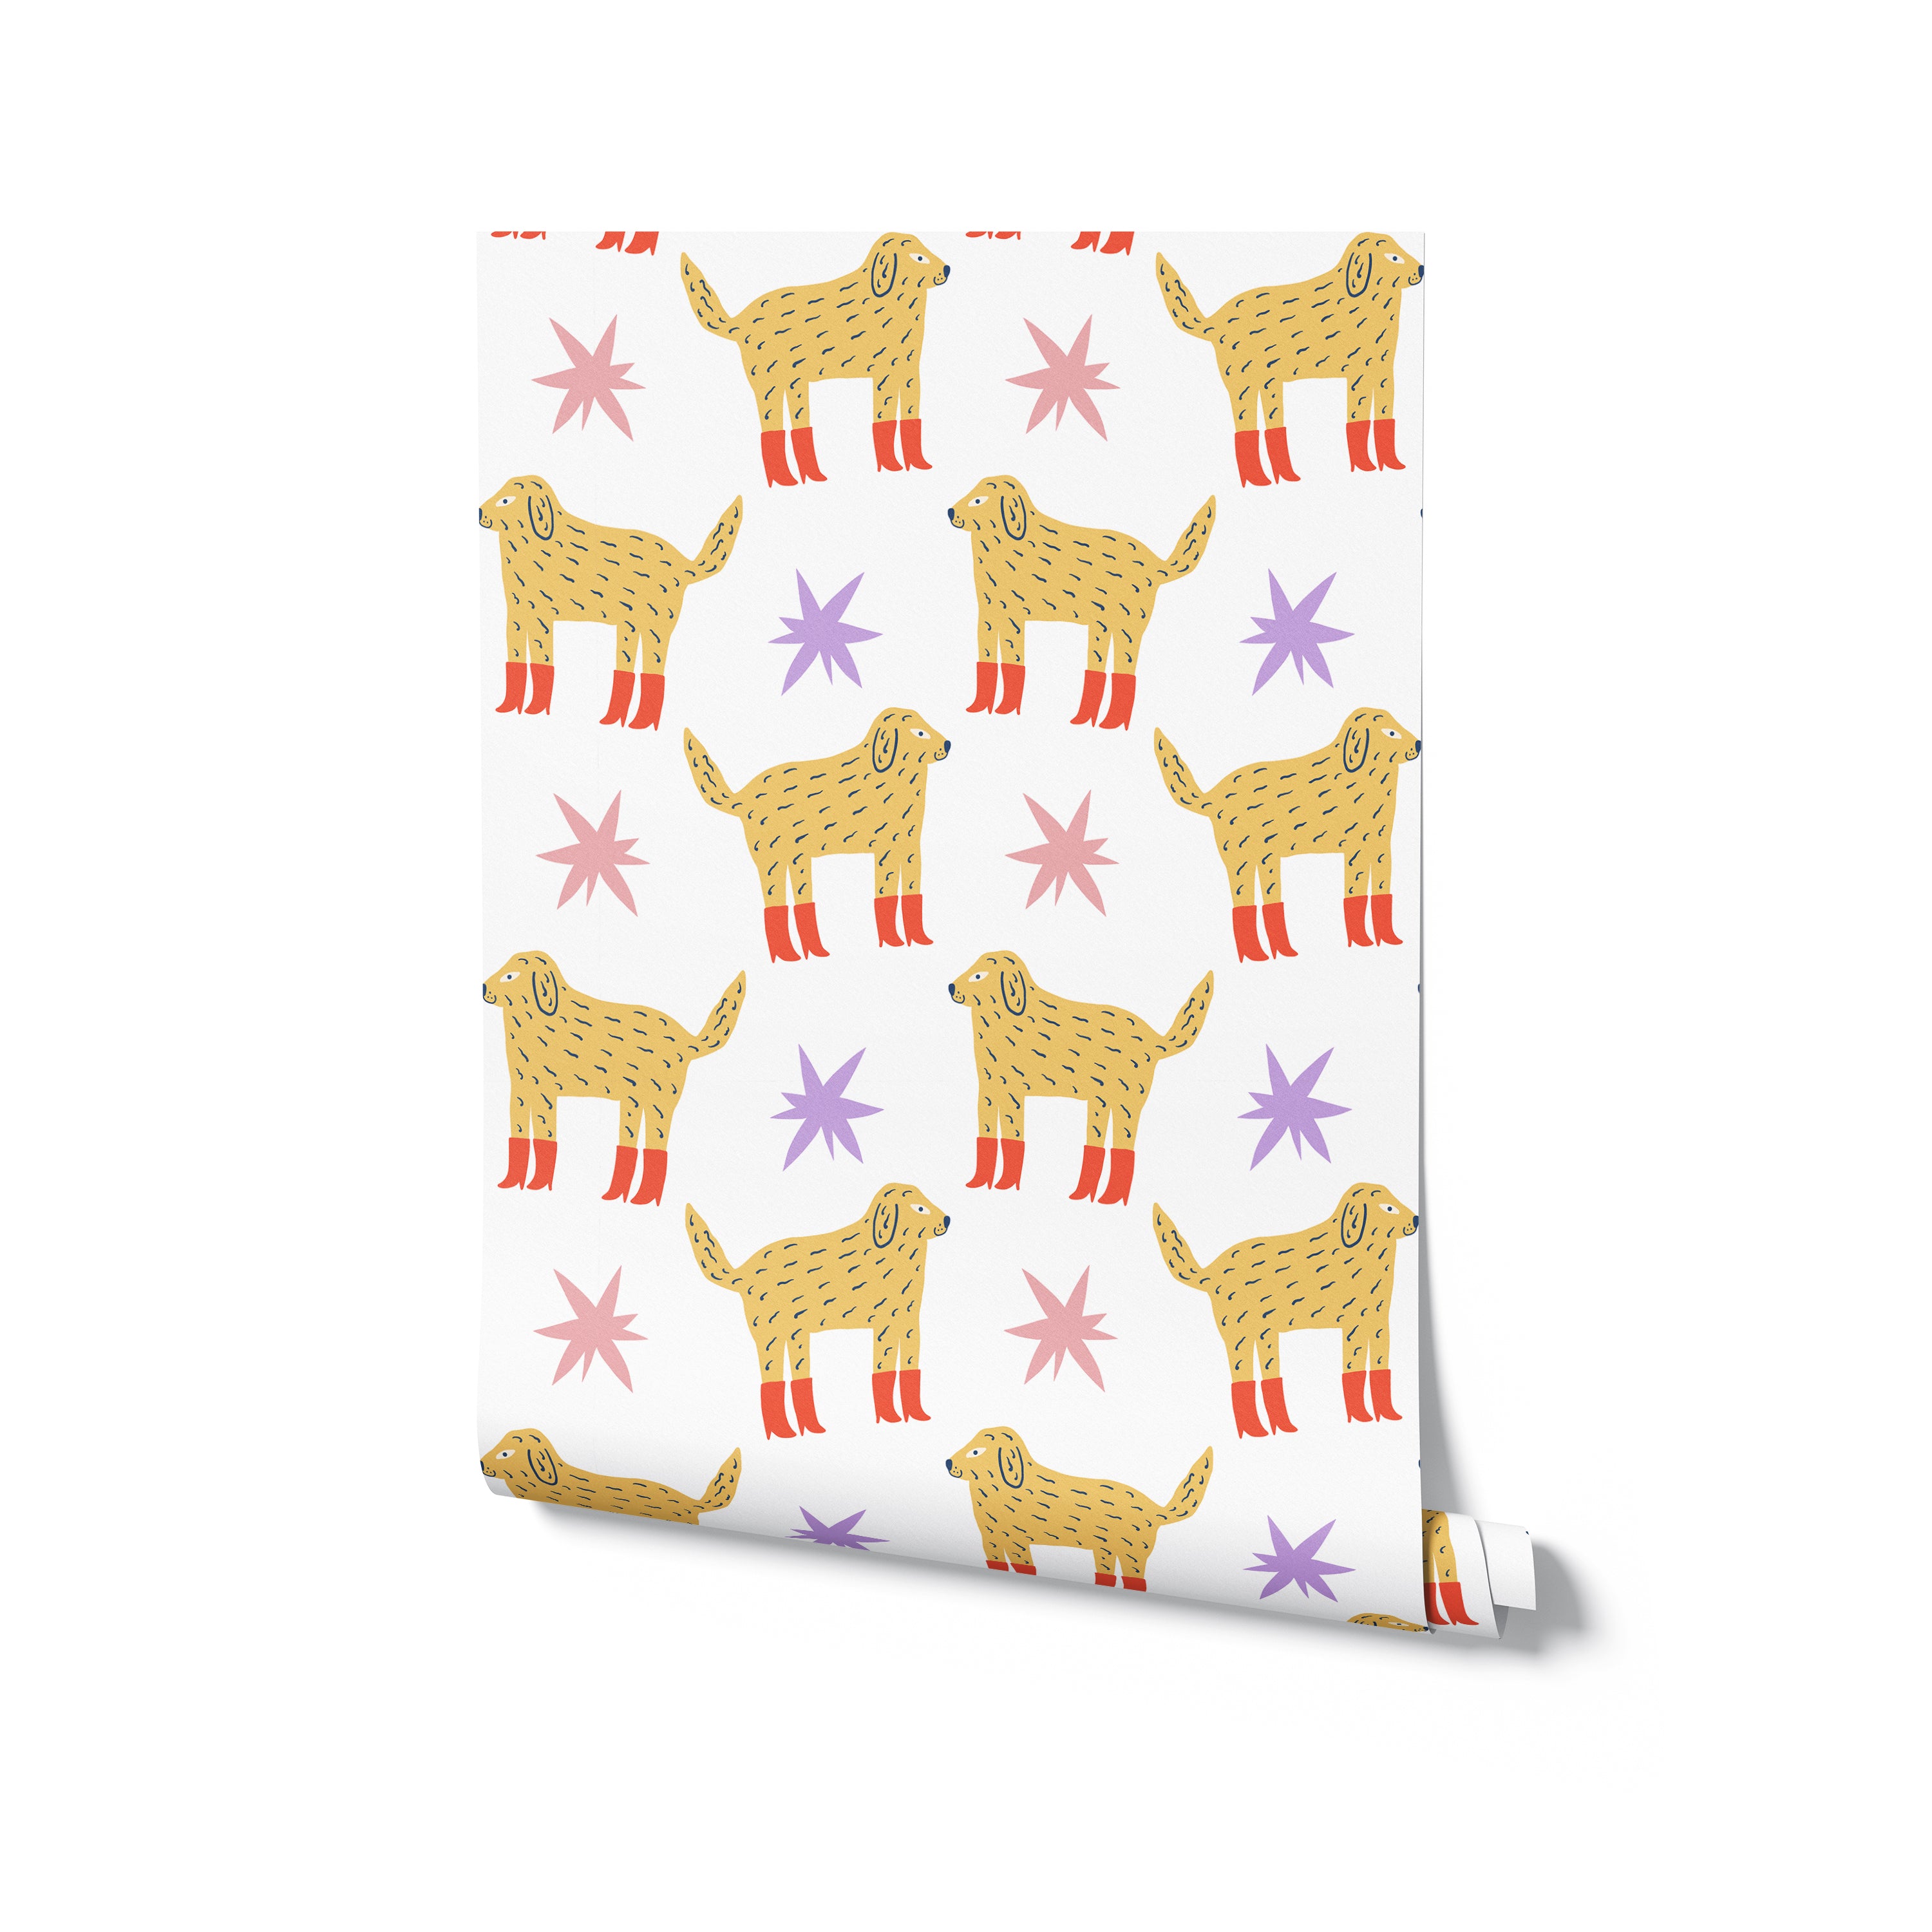 A roll of 'Dog Wallpaper 43' displaying a joyful pattern of tan dogs wearing red boots, interspersed with colorful stars on a white base. This wallpaper is perfect for brightening up spaces with its fun and energetic design, suitable for nurseries or playrooms.